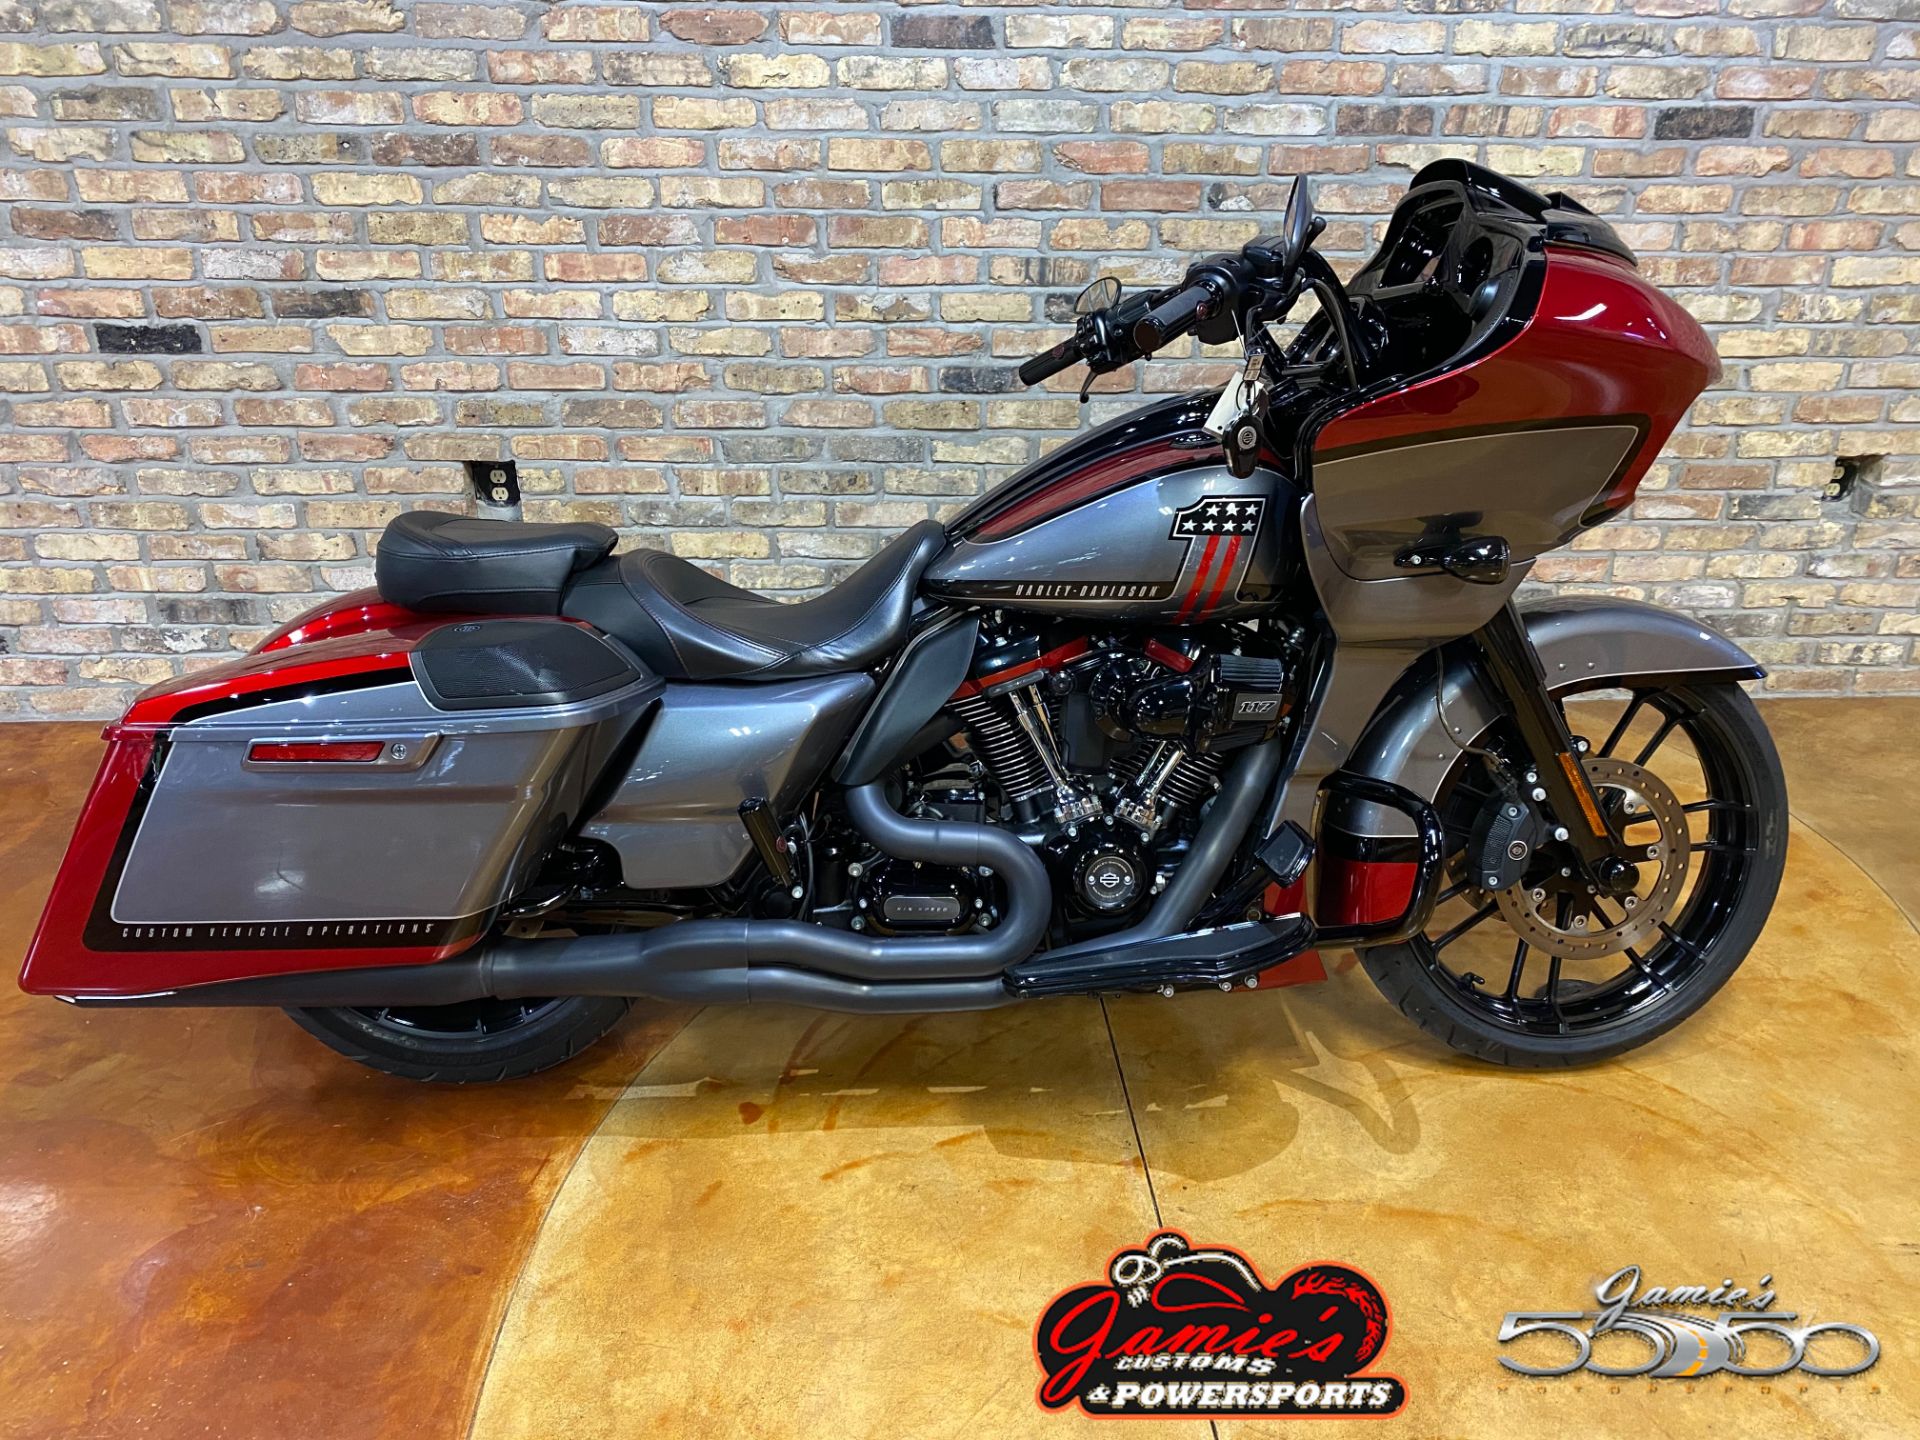 Used 2019 Harley Davidson Cvo Road Glide Motorcycles In Big Bend Wi 4382 Red Pepper Magnetic Grey With Black Hole